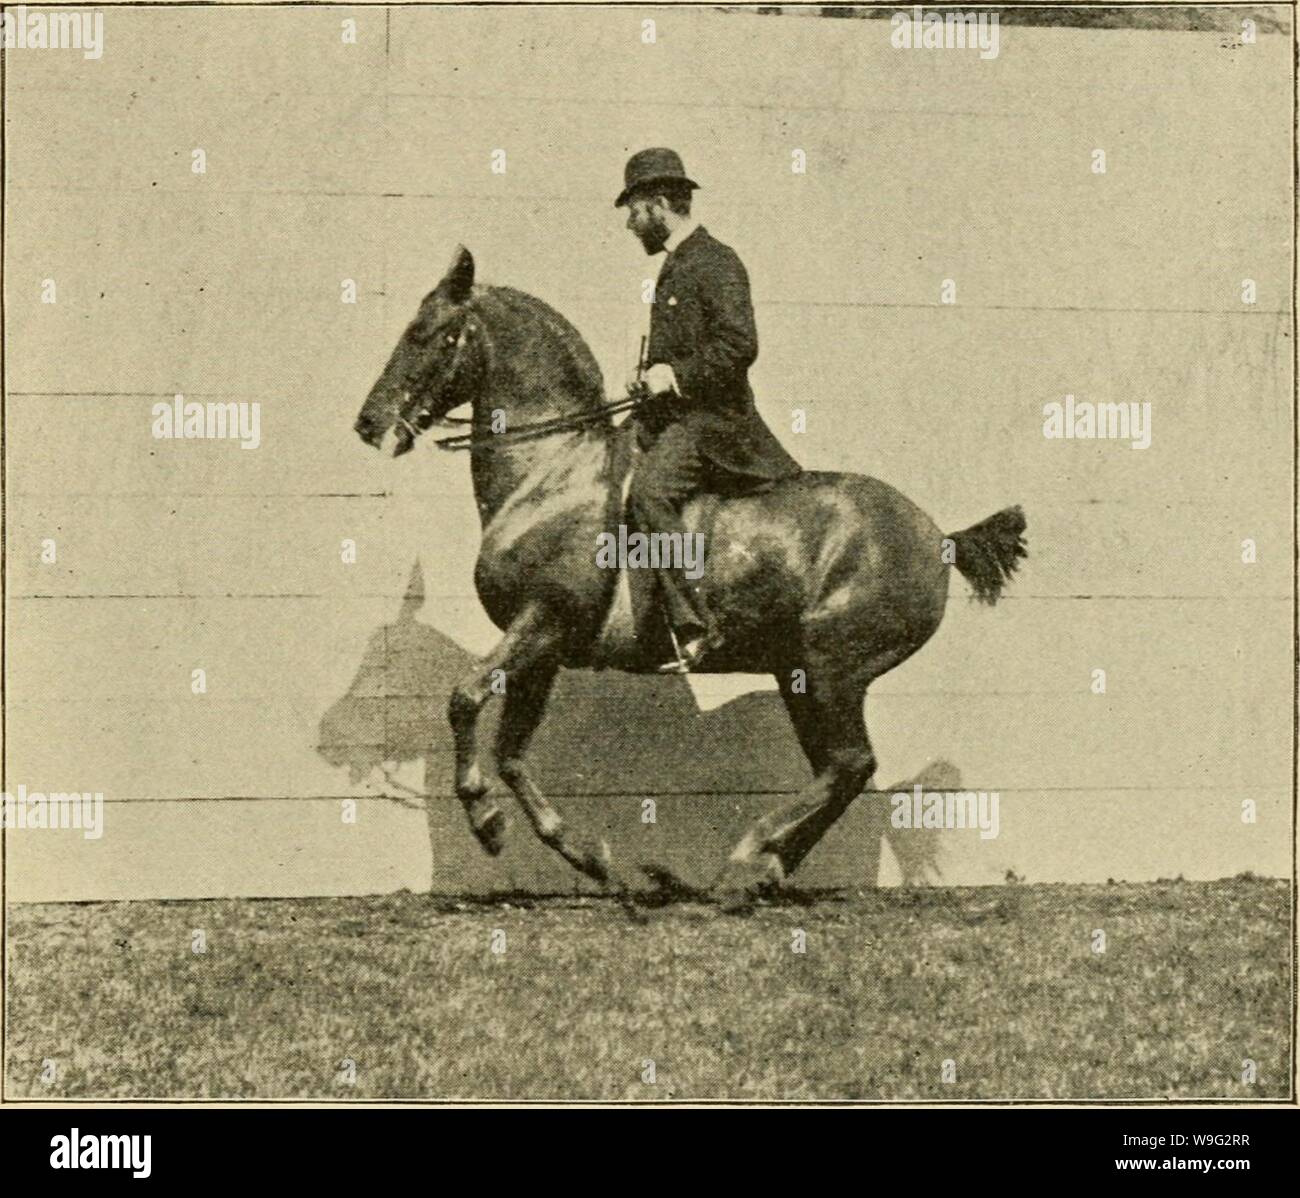 Archive image from page 98 of Curb, snaffle, and spur . Curb, snaffle, and spur : a method of training young horses for the cavalry service, and for general use under the saddle  curbsnafflespu00ande Year: 1894 ( The Gallop. — The Gallop Changes. 93 turning from a circle on one hand to a circle on the other hand, taking care that the change is made as the turn to the other hand is demanded; for, in turning abruptly from a circle on one    GALLOP CHANGES. FRO.M RIGHT TO LEFT. hand to a circle on the other, the horse will often try to begin the change with the fore legs, and this is not only a f Stock Photo